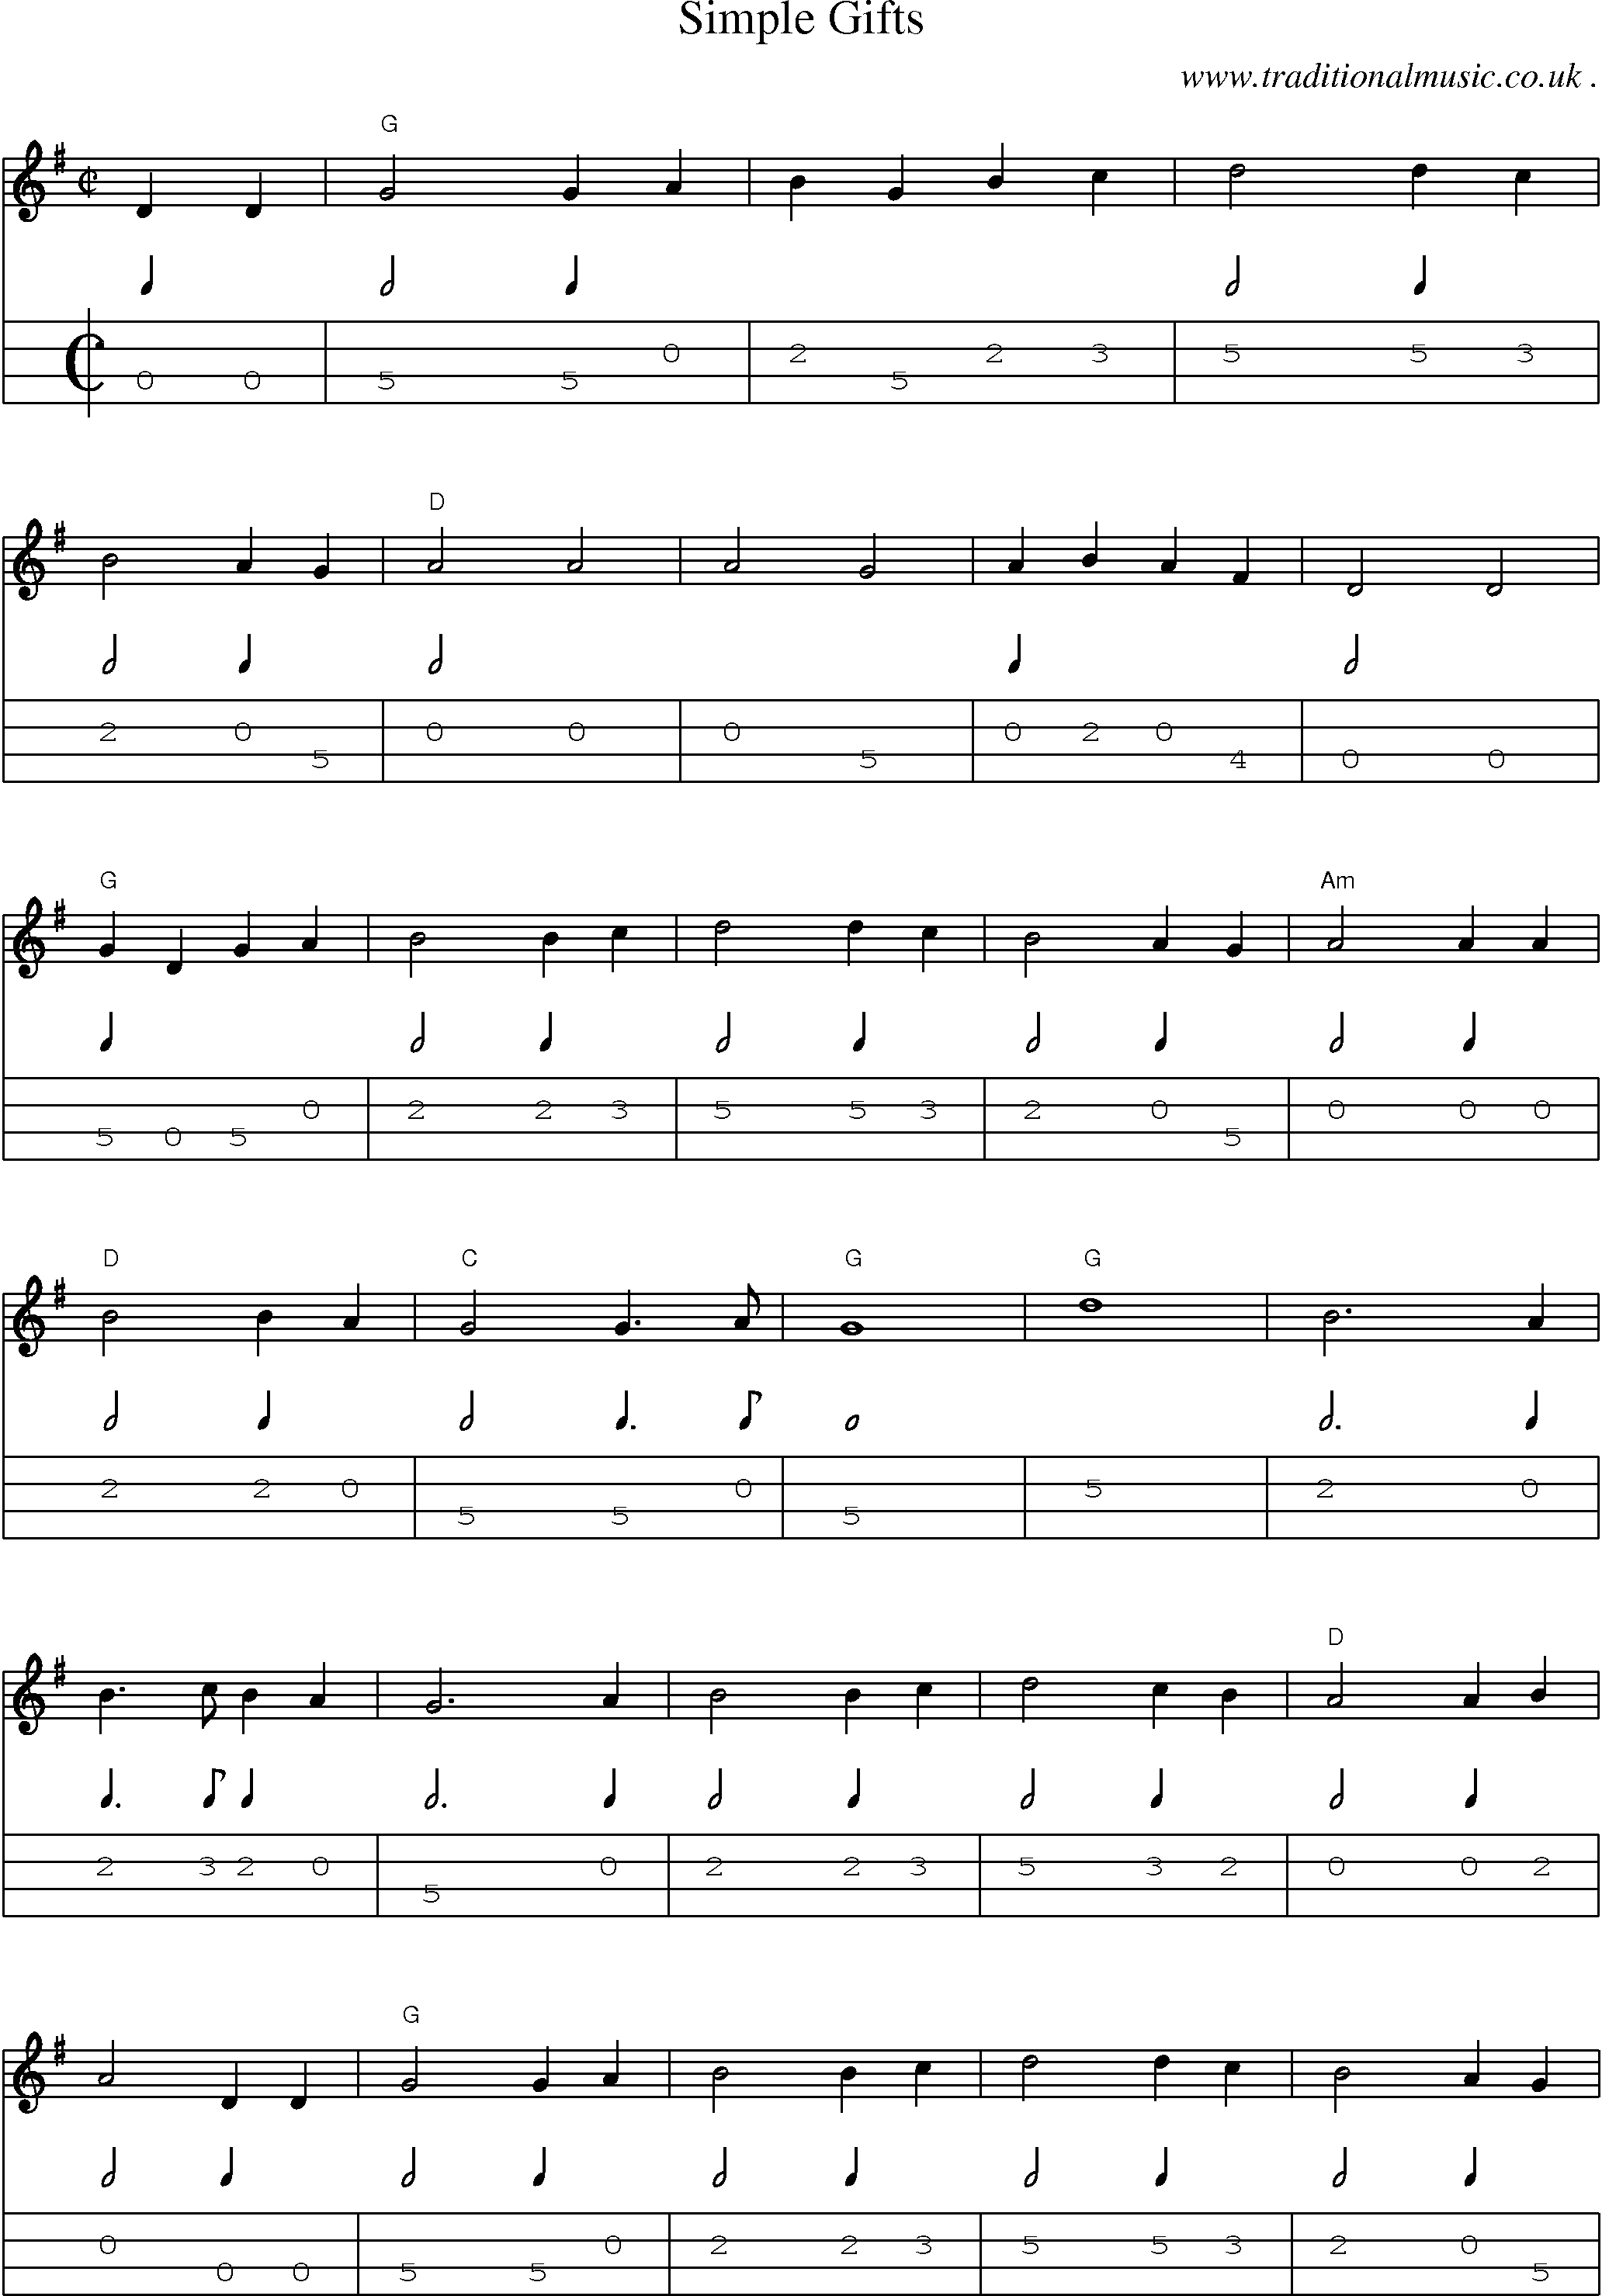 Music Score and Guitar Tabs for Simple Gifts